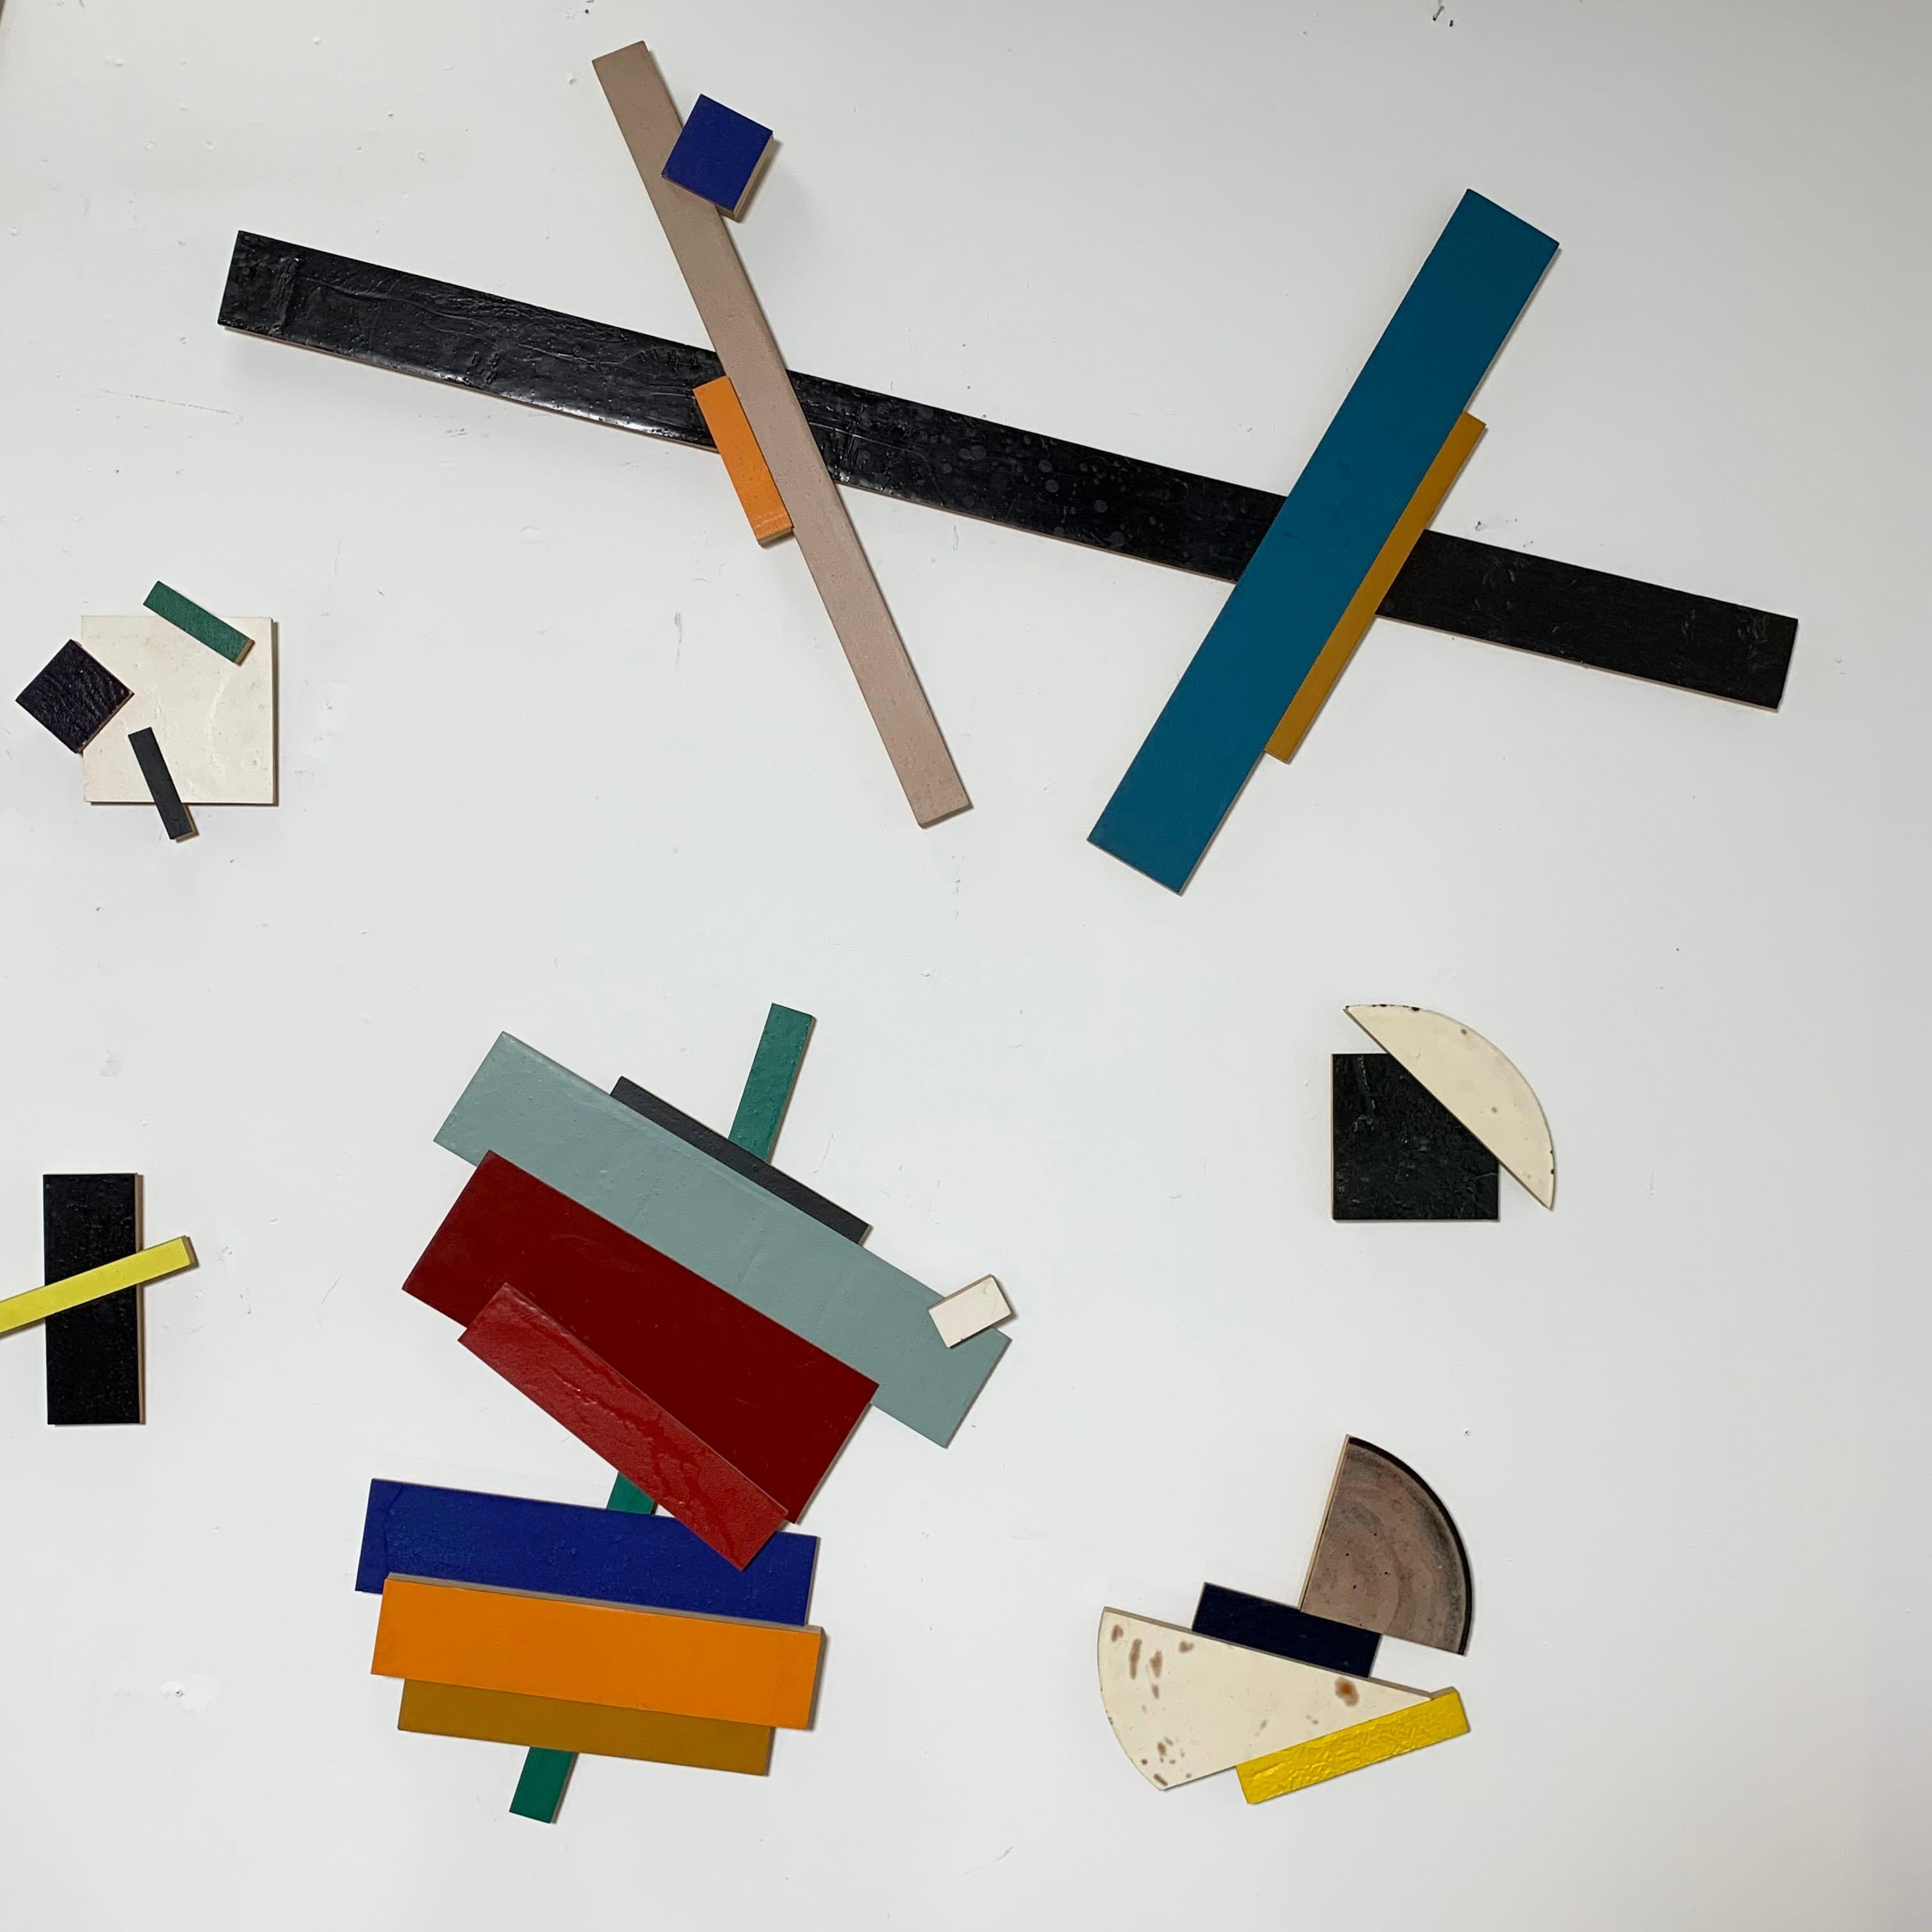 Late 20th Century Post Modern Large Scale Wall Mounted Sculpture by Tom Holste, D. 1979 For Sale